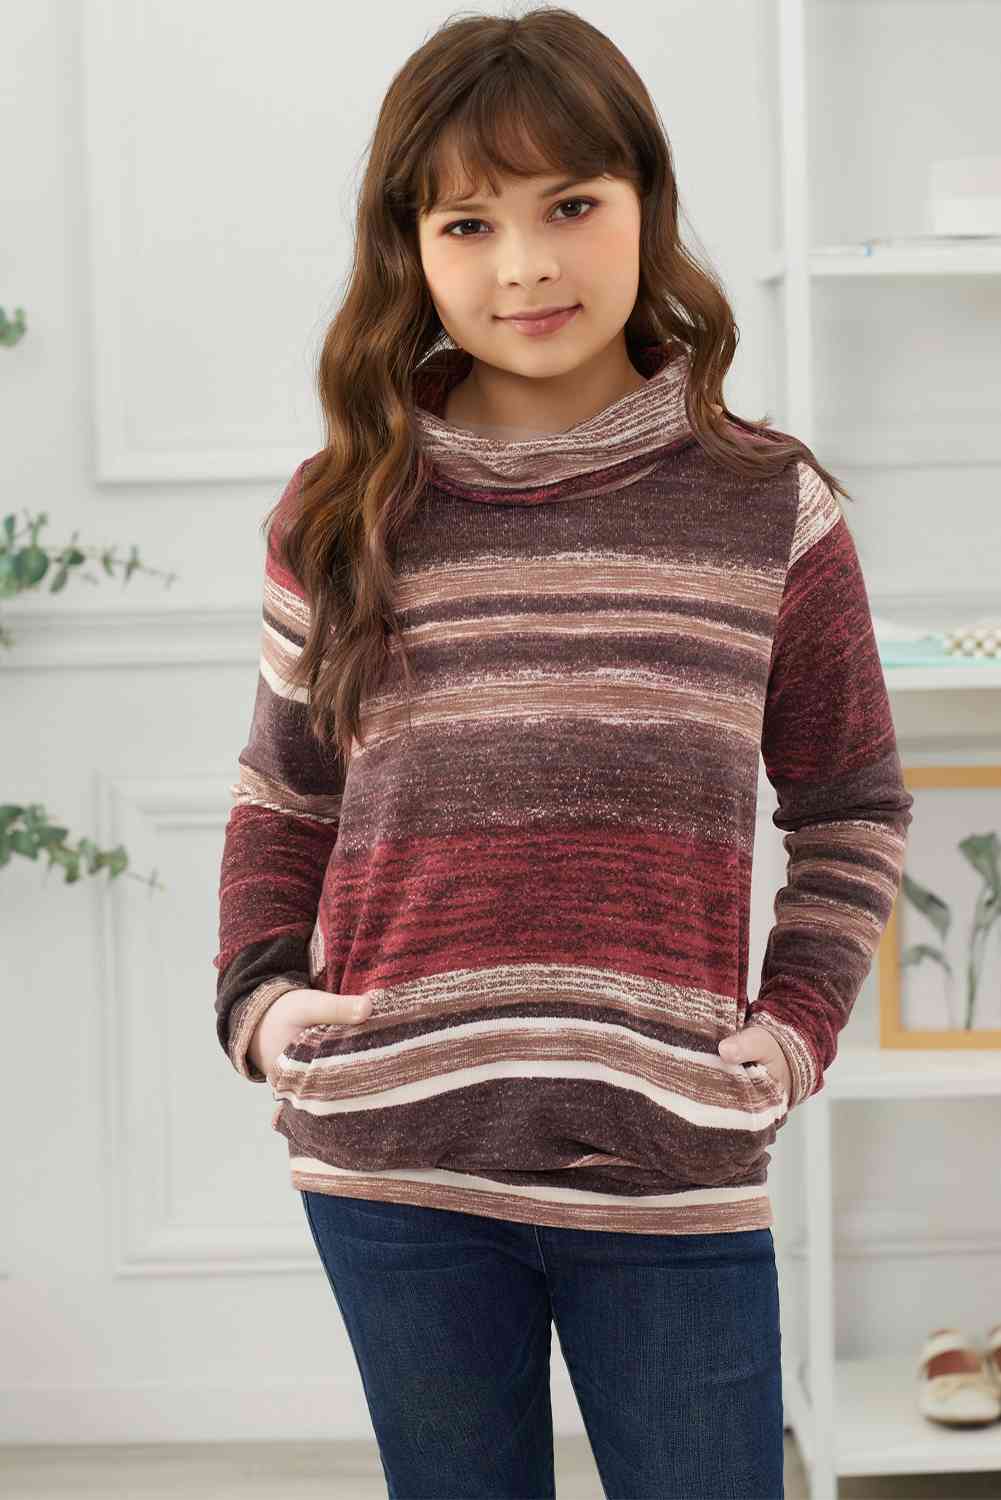 Girls Striped Cowl Neck Top with Pockets Taupe Wine Girls Tops JT's Designer Fashion